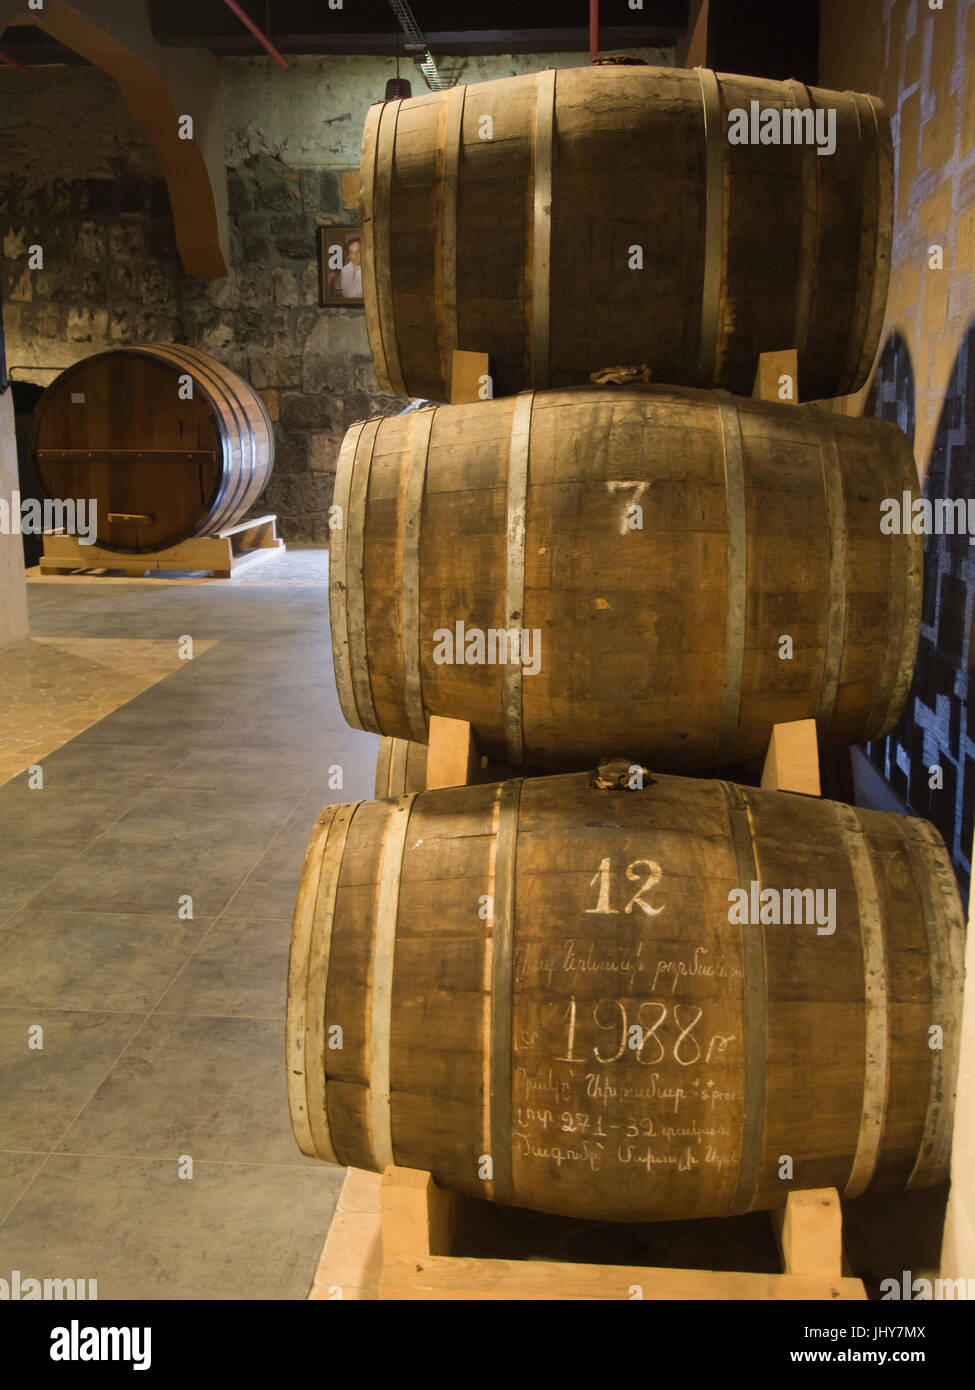 Armenia is famous amongst other for its brandy, which they locally call cognac, here the headquarters of Ararat in Yerevan, oak barrels in storage Stock Photo